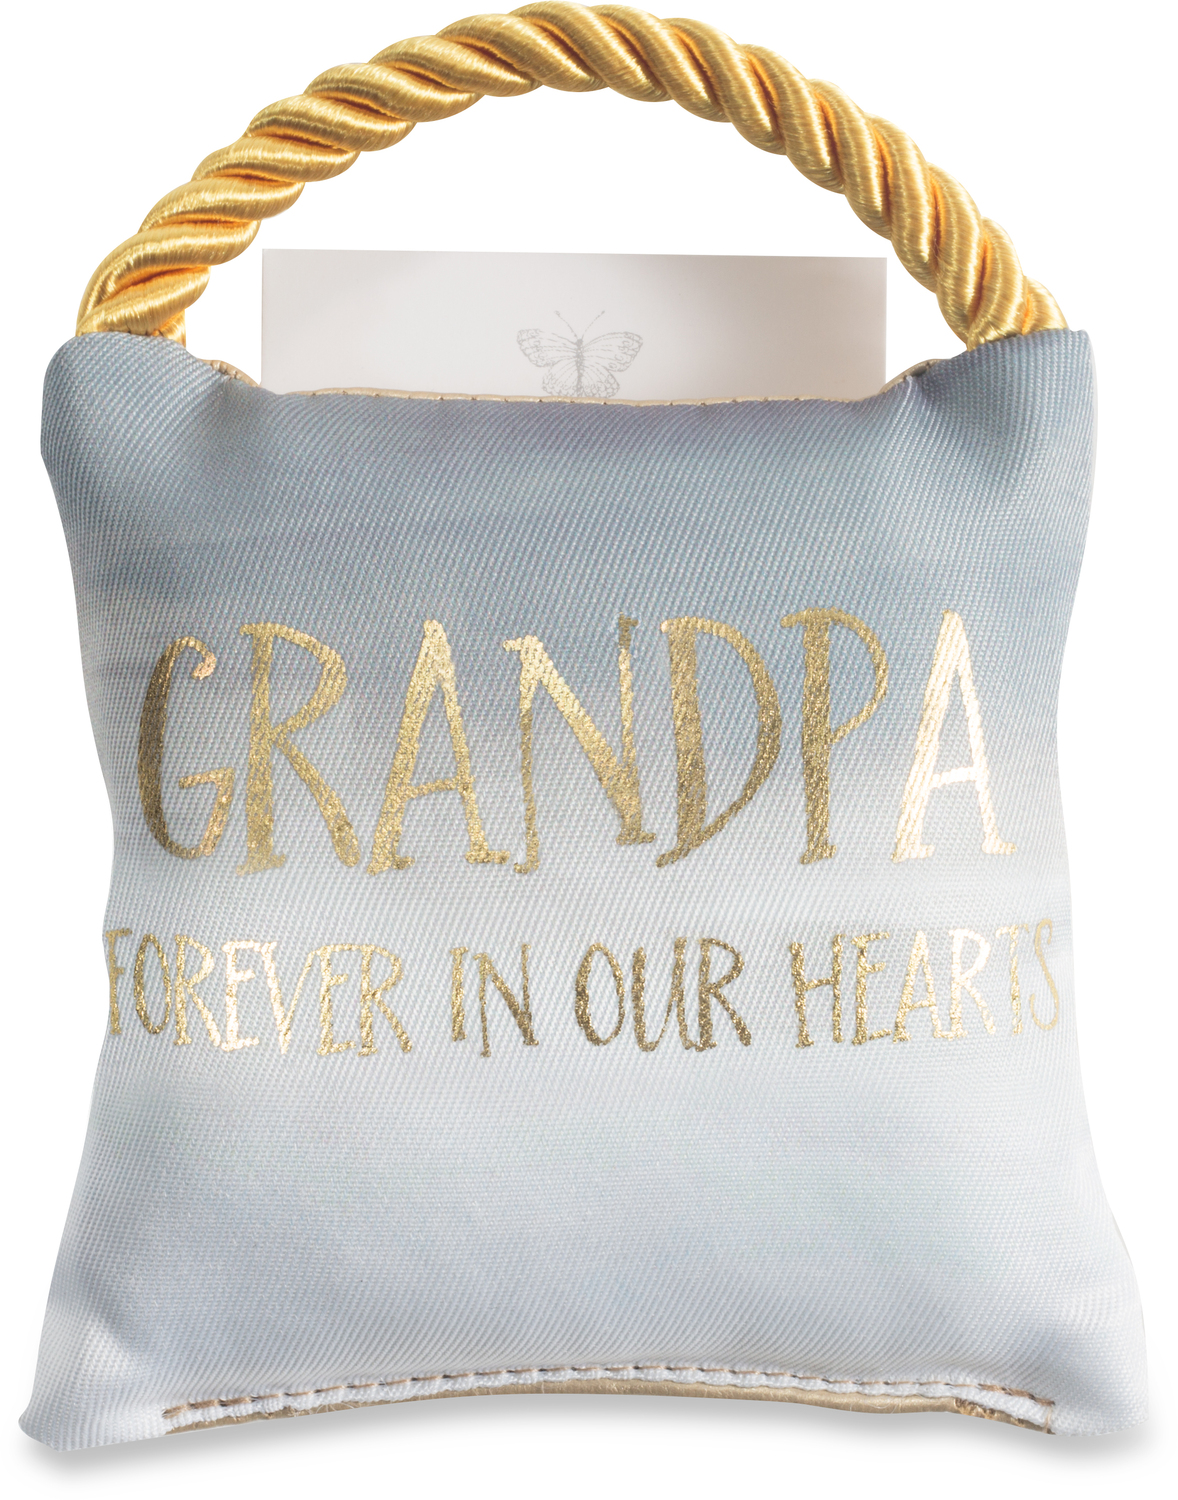 Grandpa by Butterfly Whispers - Grandpa - 4.5" Memorial Pocket Pillow